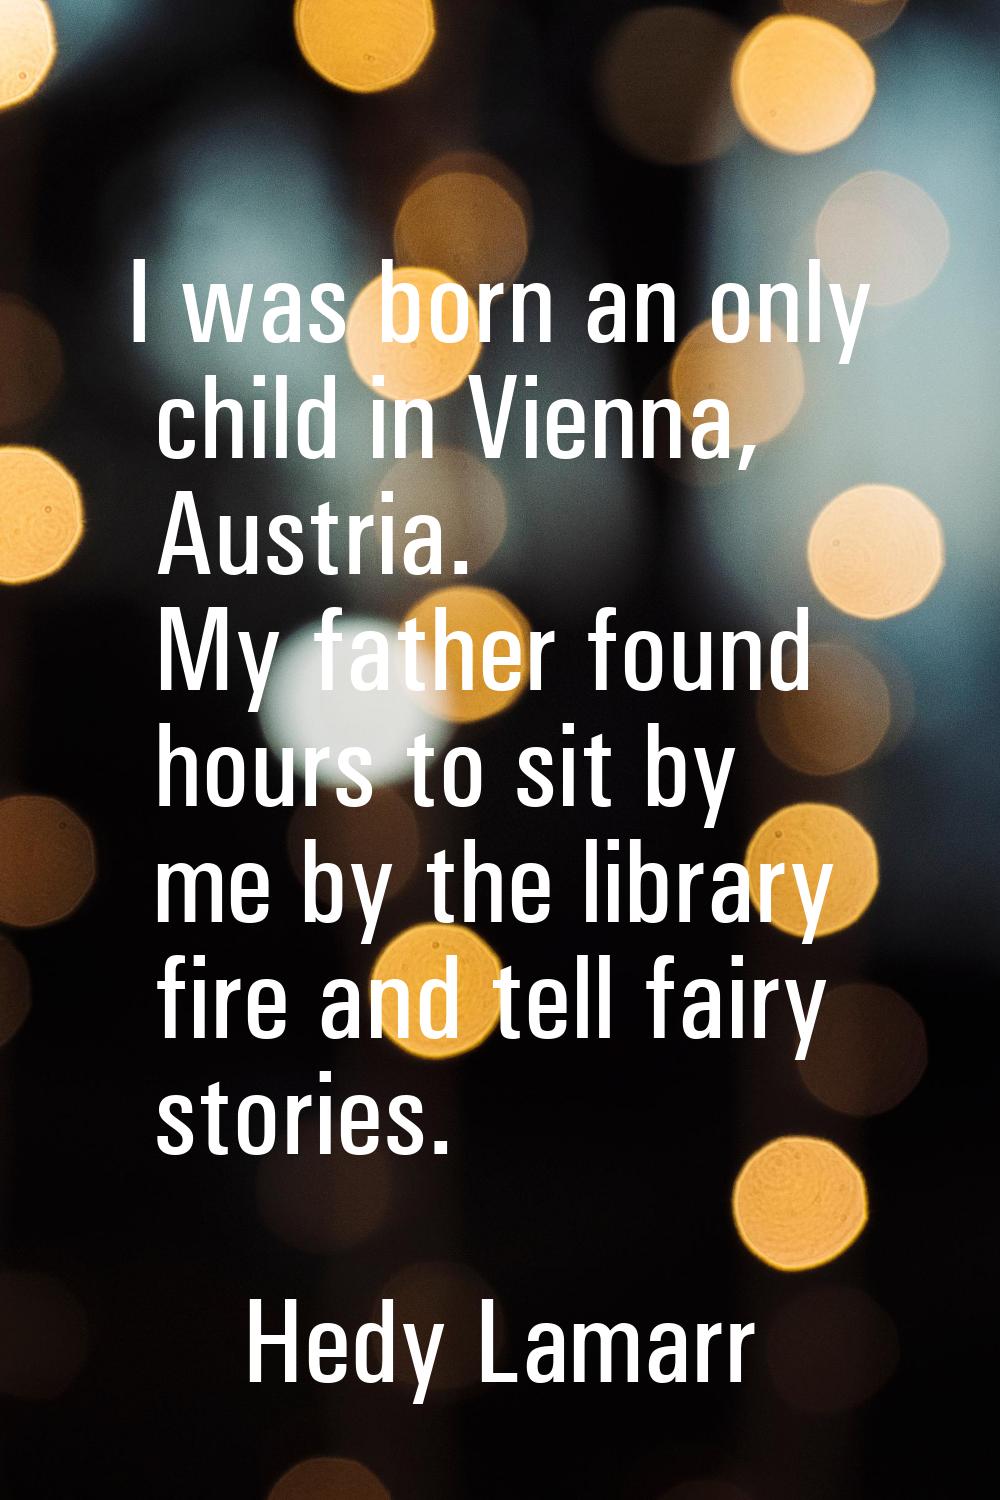 I was born an only child in Vienna, Austria. My father found hours to sit by me by the library fire